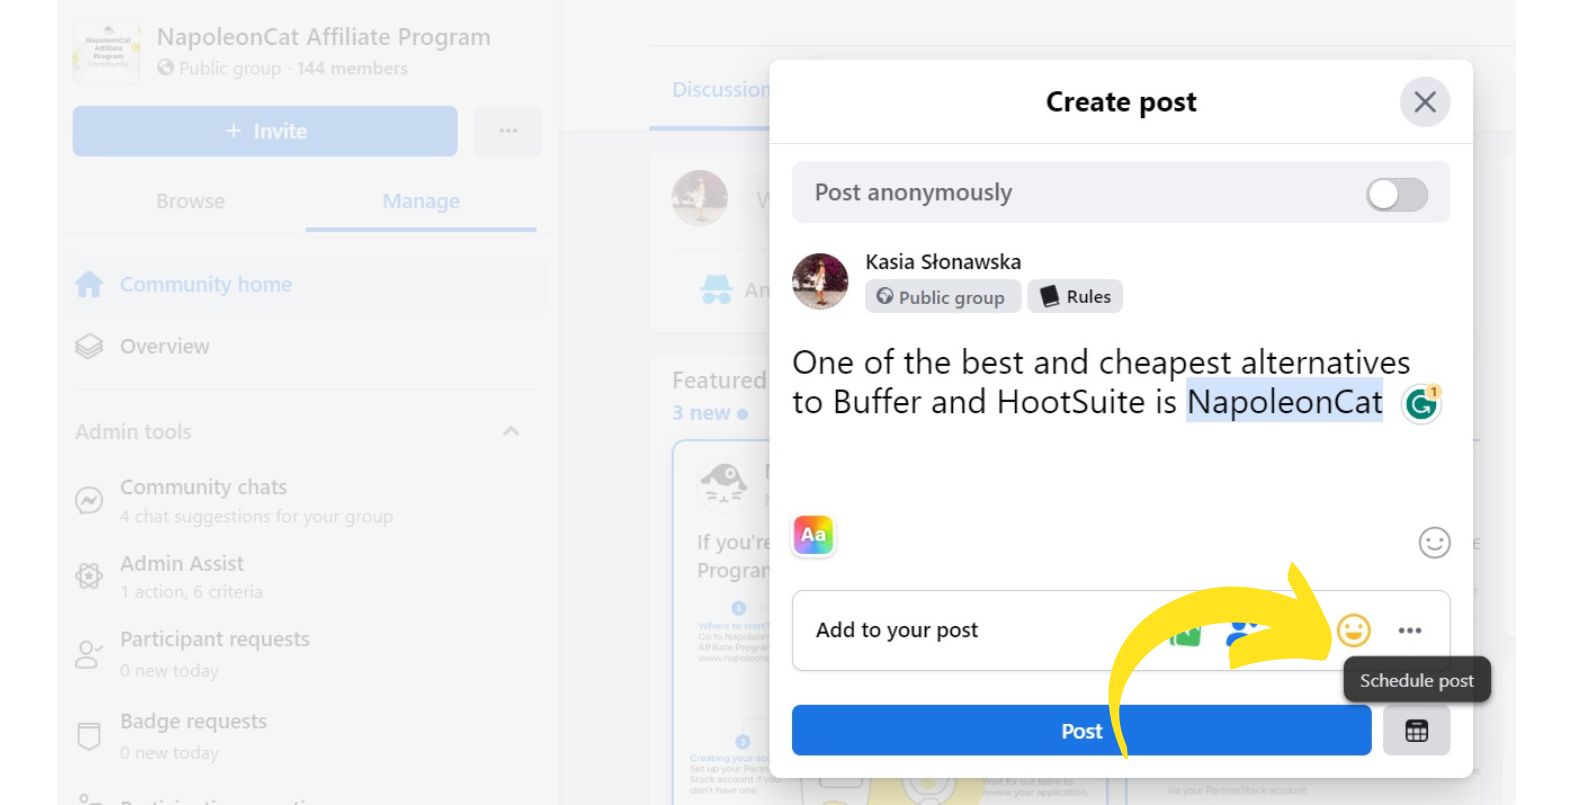 A screenshot from Facebook showcasing how to schedule posts on Facebook Groups